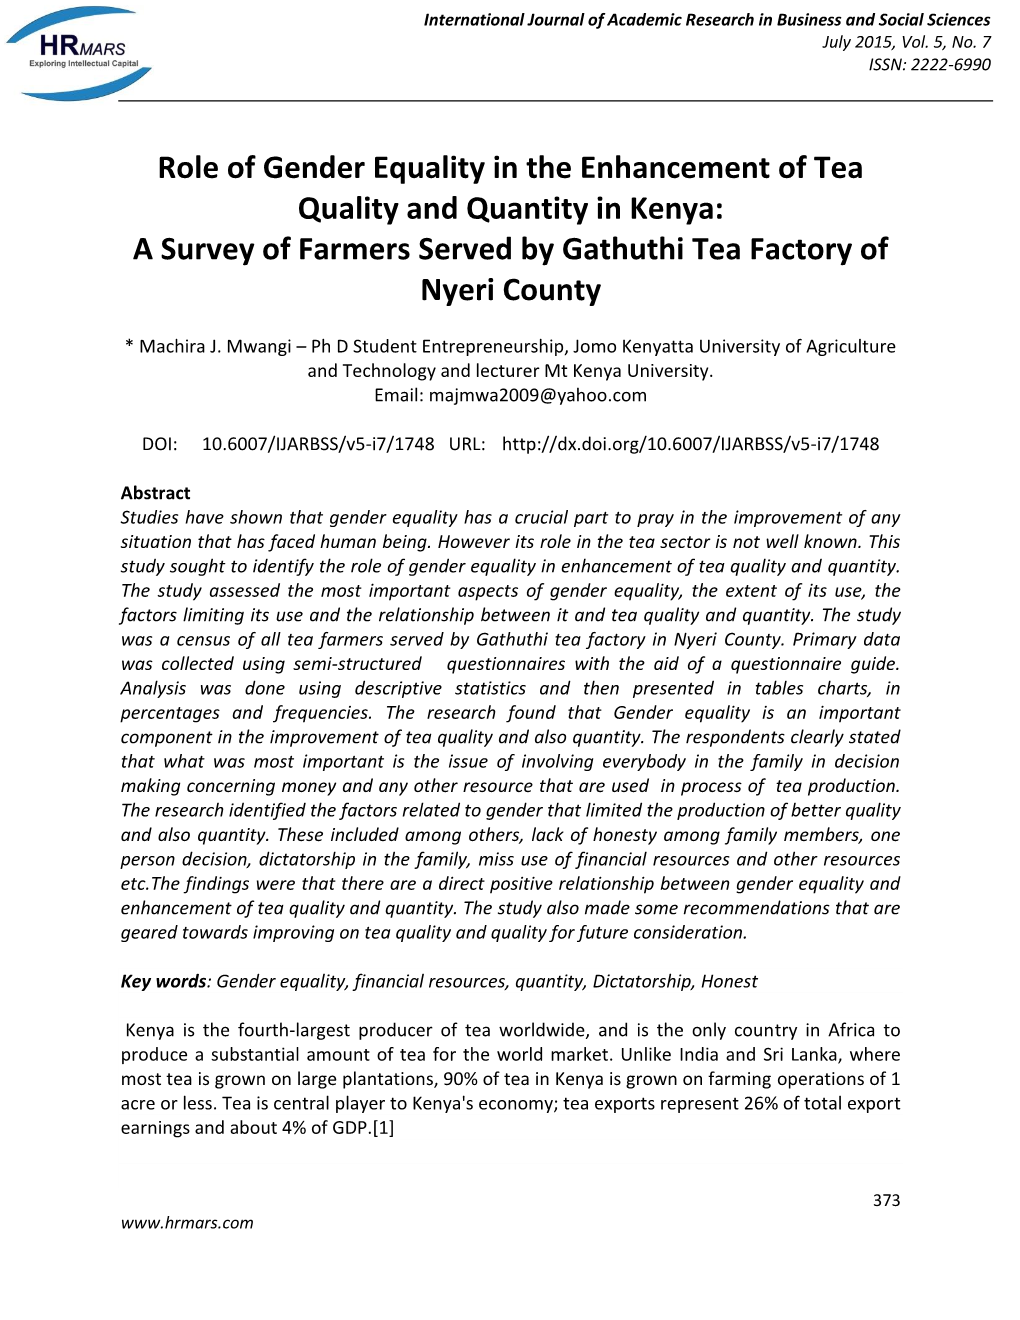 Role of Gender Equality in the Enhancement of Tea Quality and Quantity in Kenya: a Survey of Farmers Served by Gathuthi Tea Factory of Nyeri County